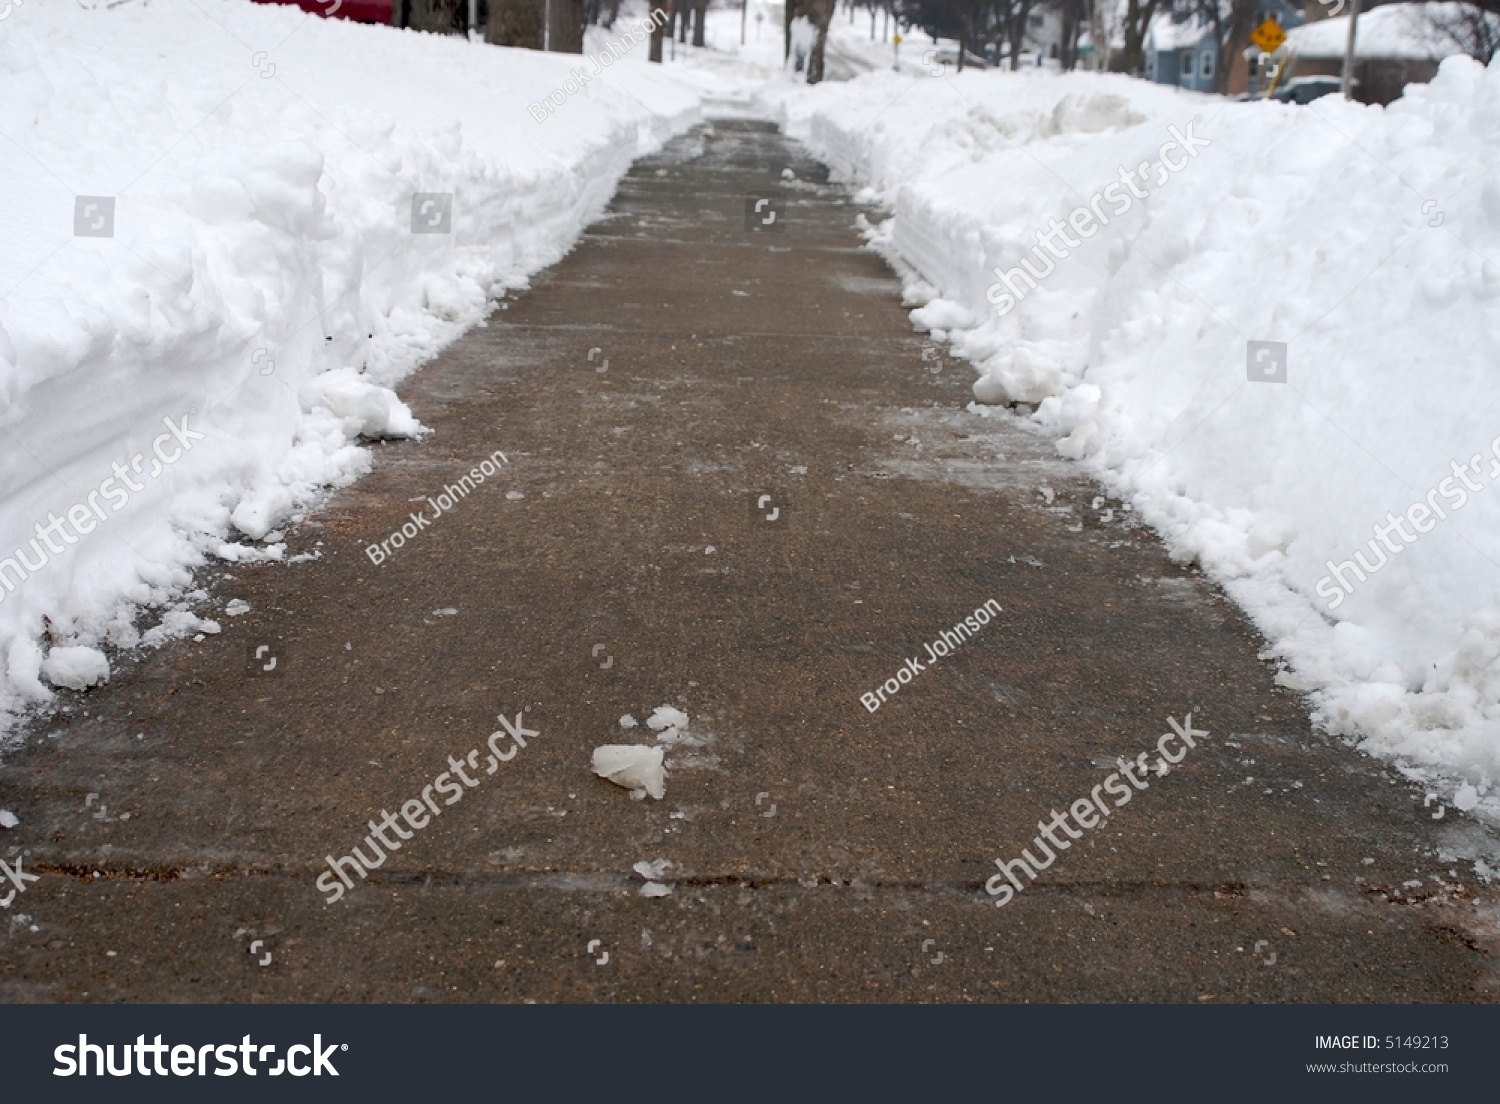 A Sidewalk Is Cleared Of Snow. Stock Photo 5149213 : Shutterstock